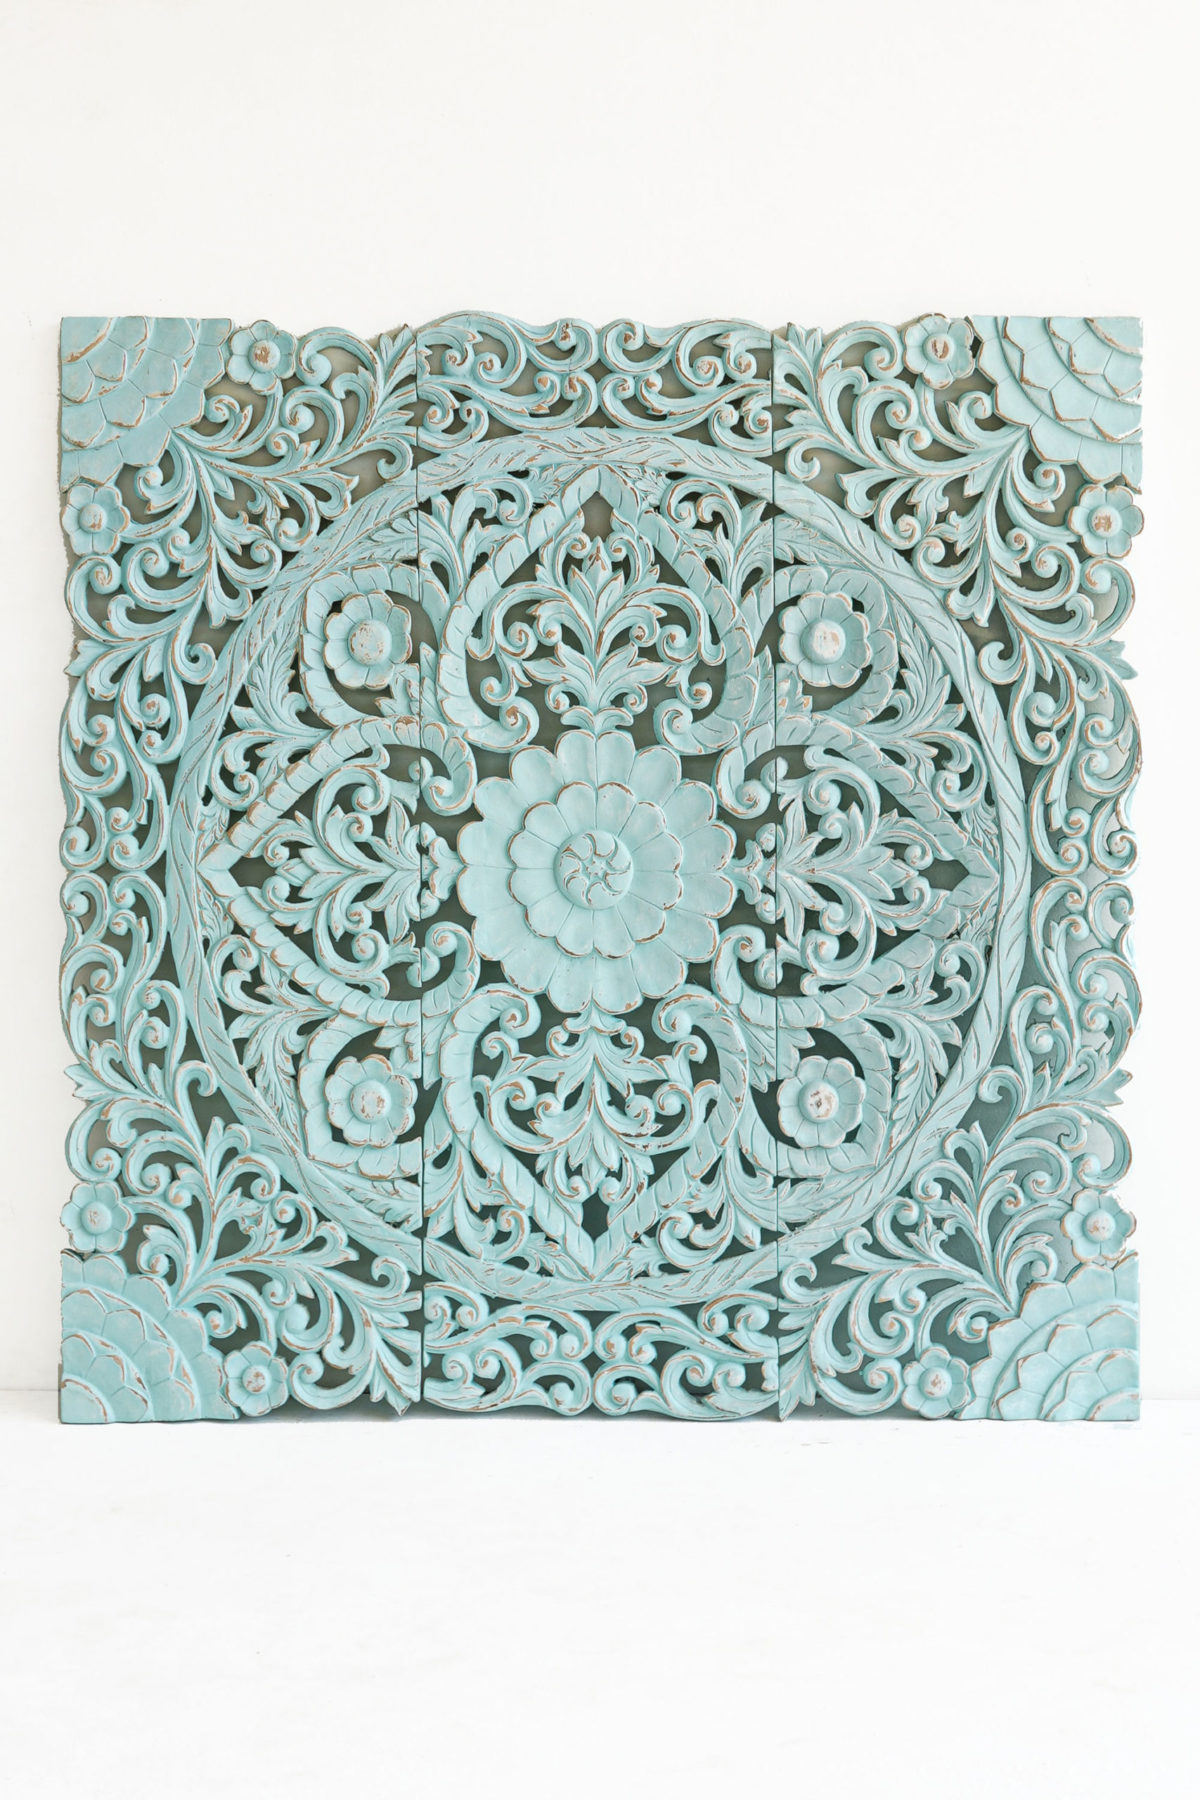 Hand painted blue wash wooden carved panels